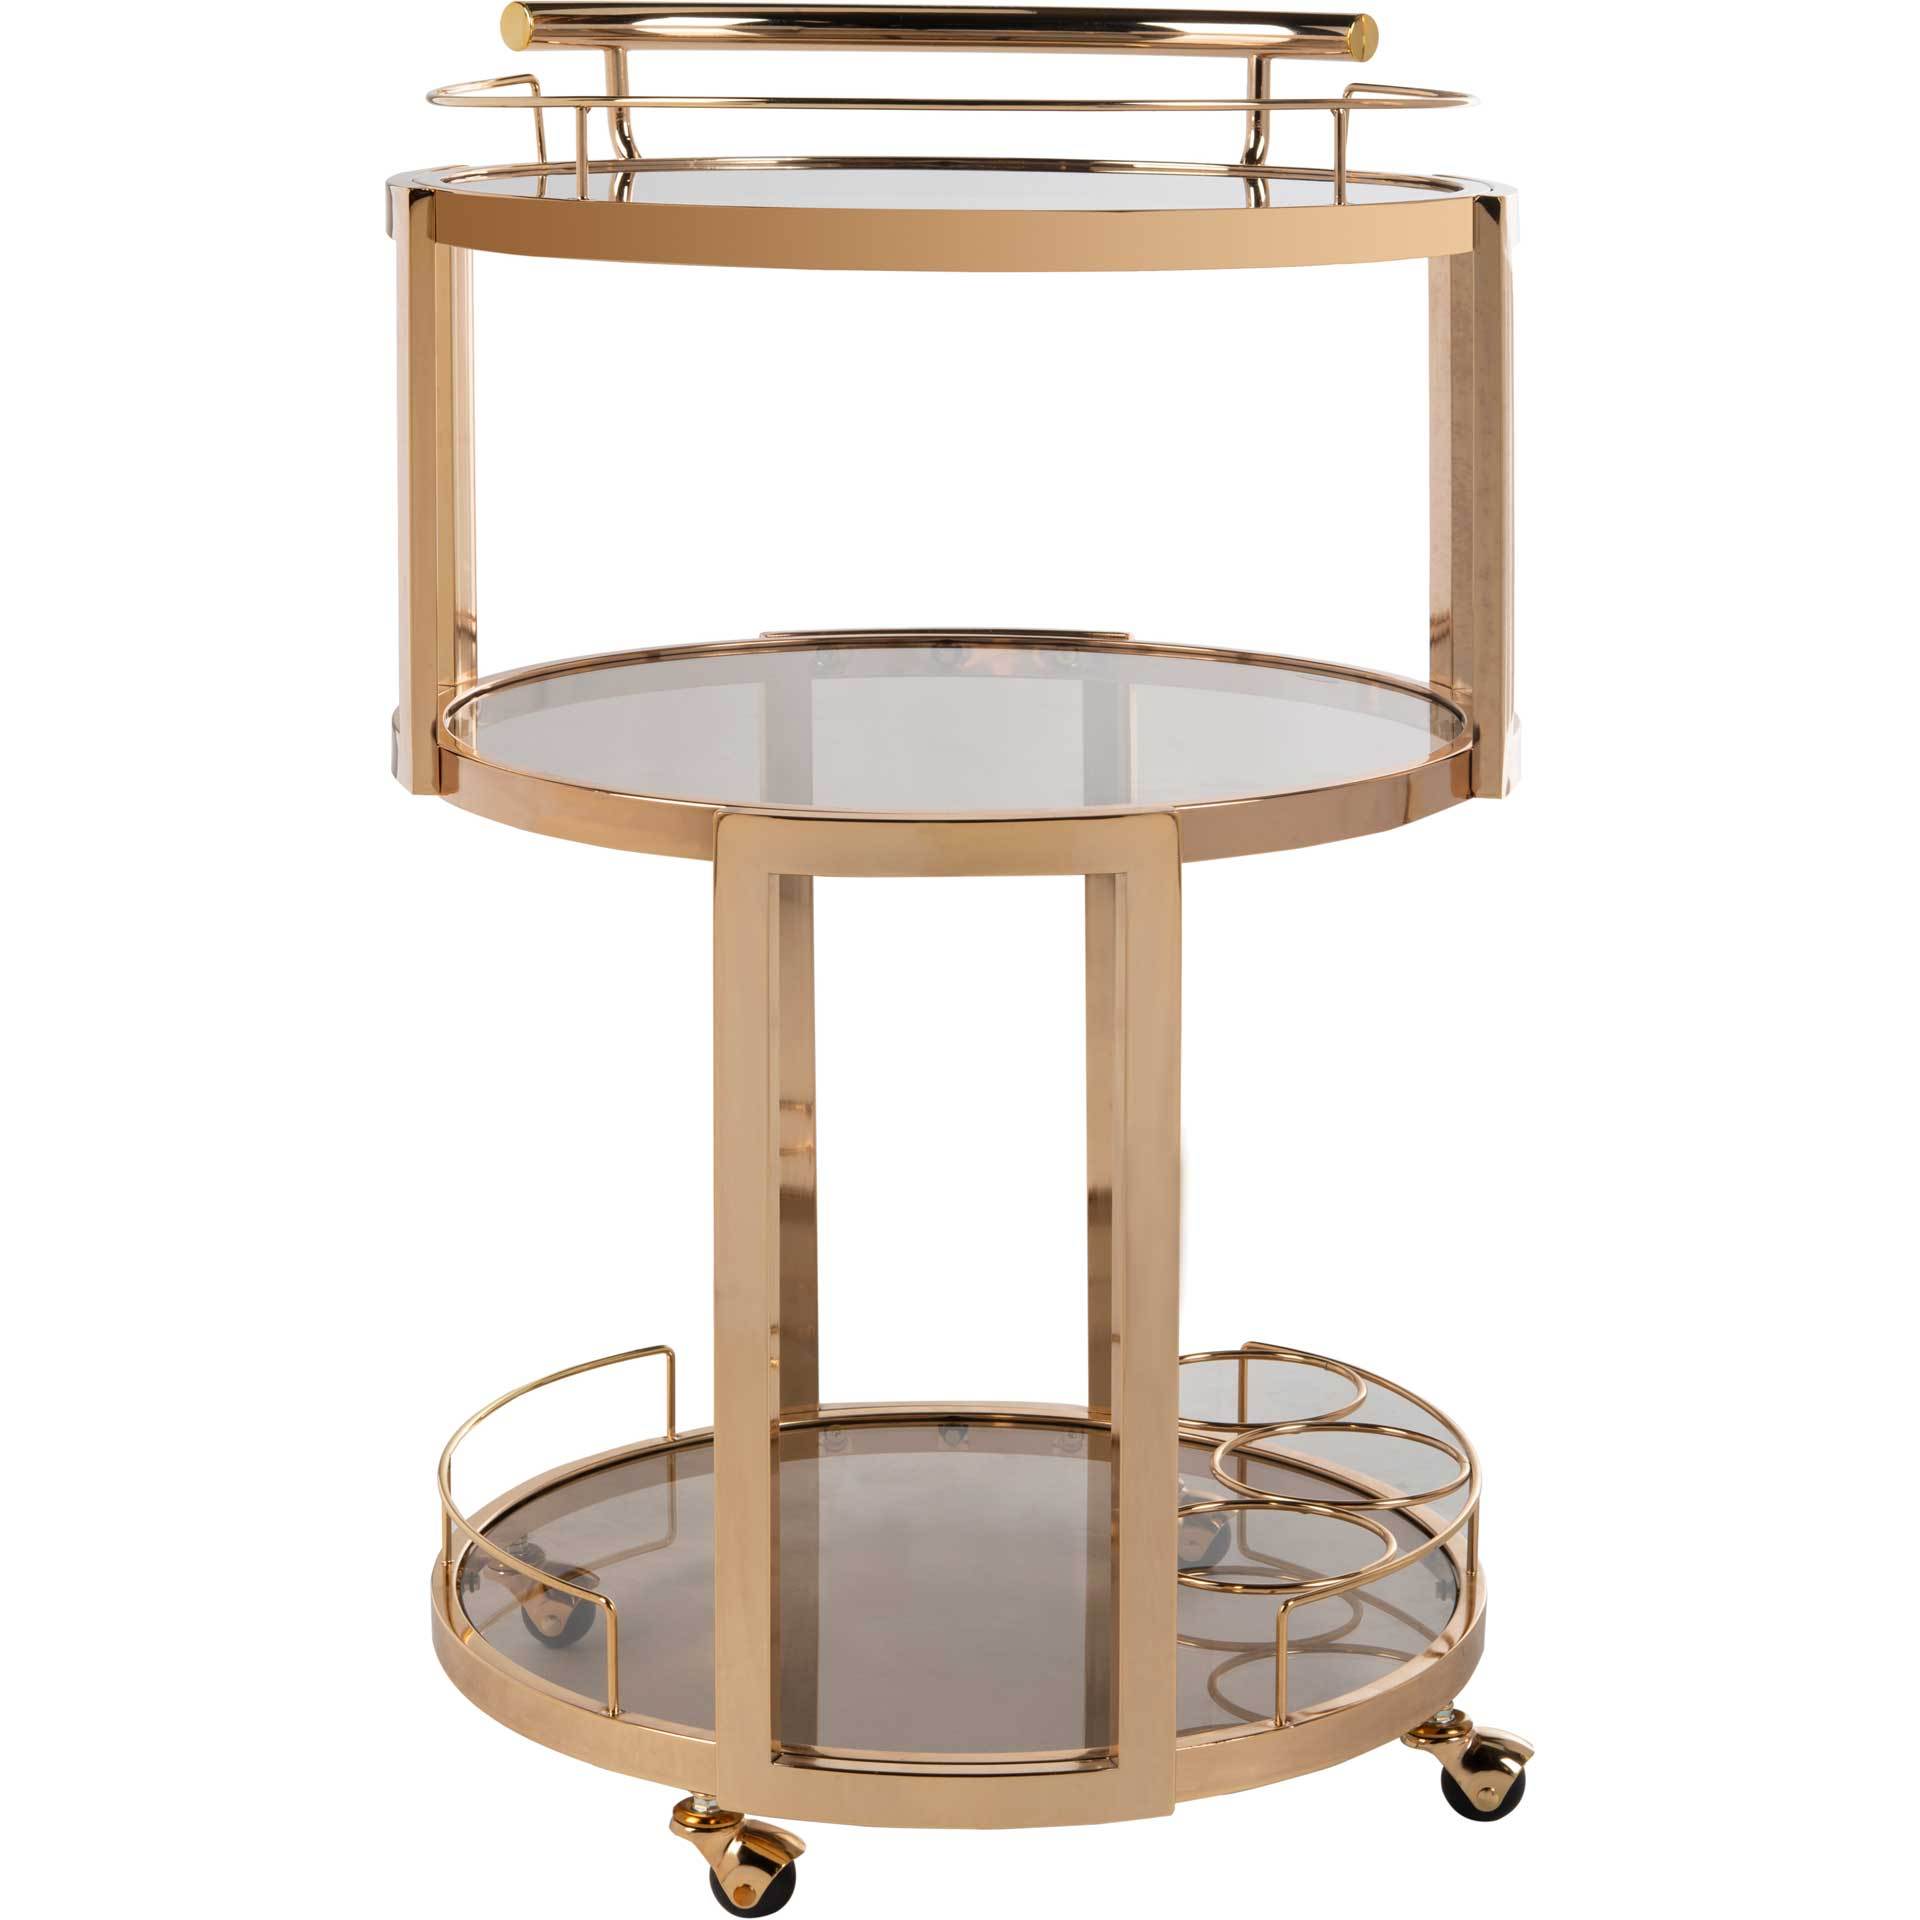 Ricky 3 Tier Round Bar Cart and Wine Rack Gold/Tinted Glass